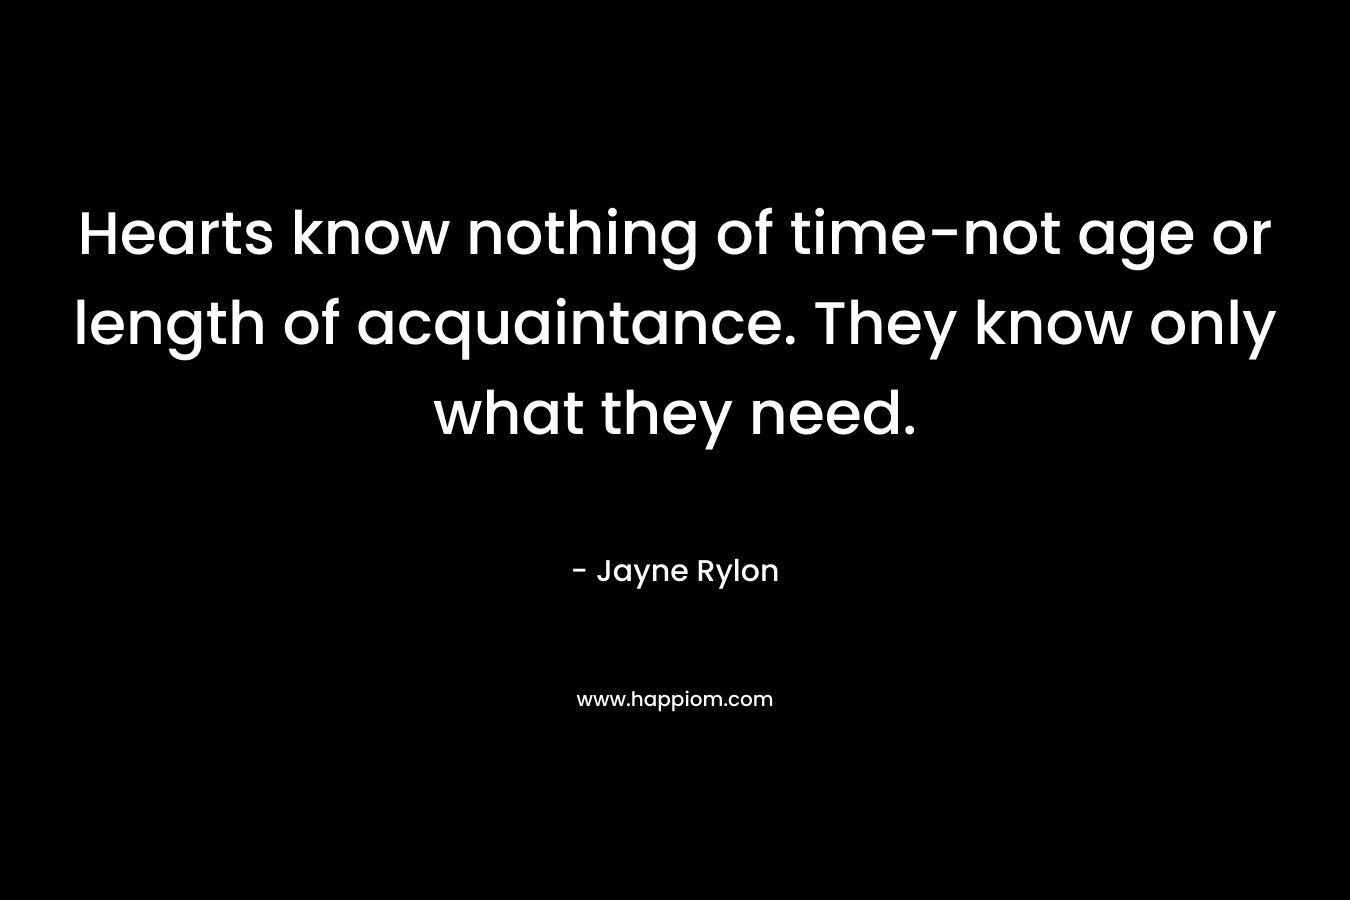 Hearts know nothing of time-not age or length of acquaintance. They know only what they need. – Jayne Rylon